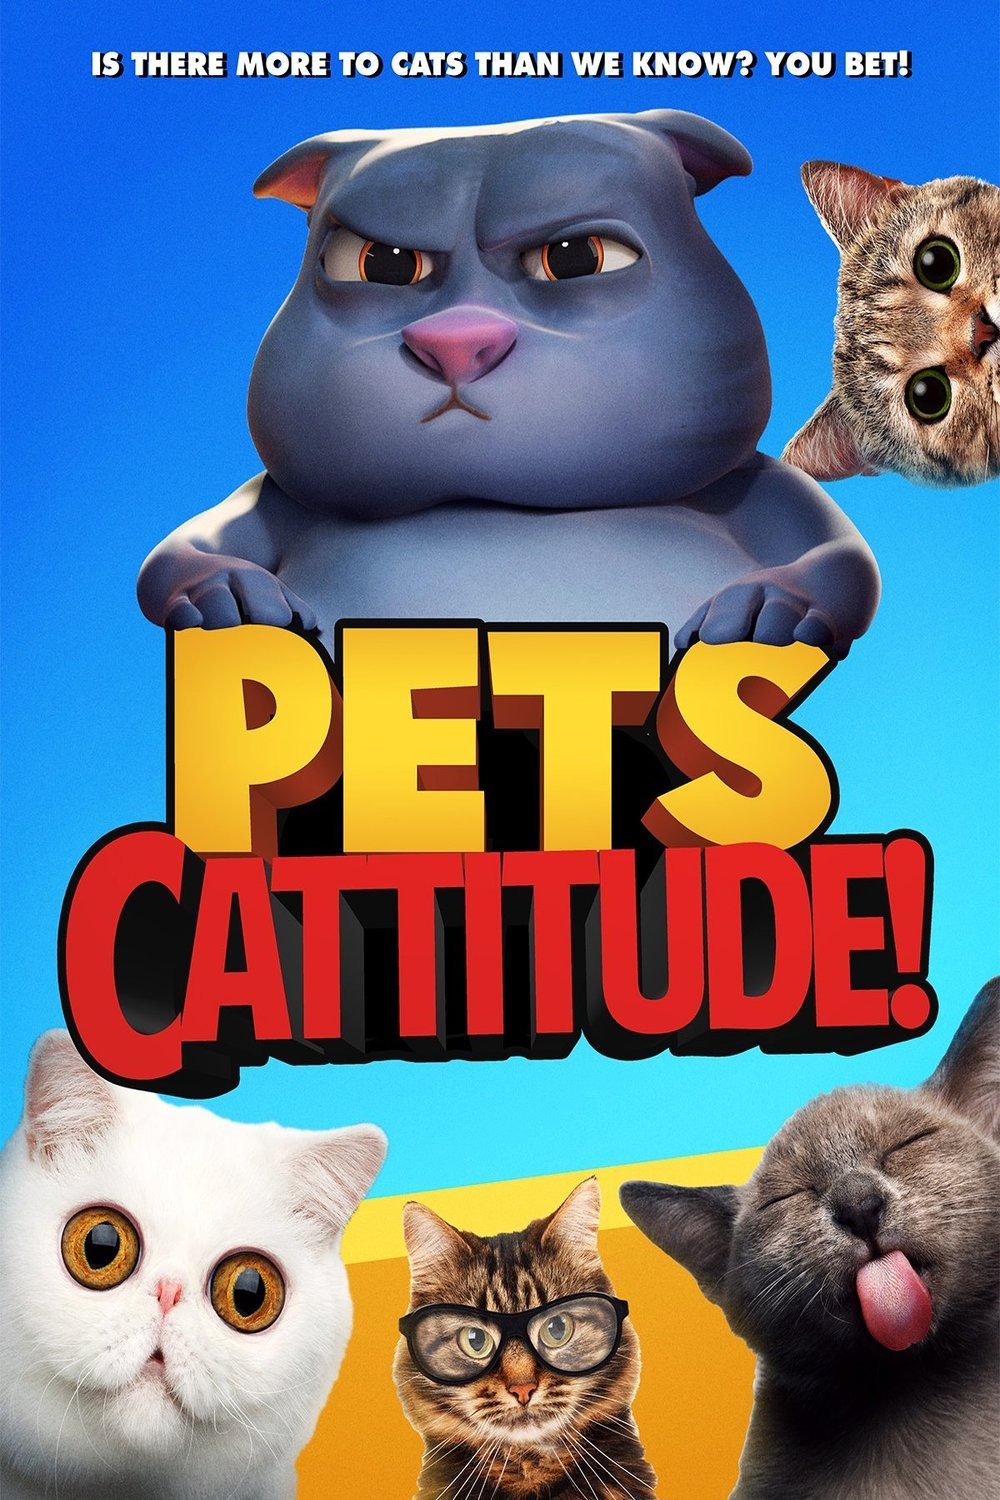 Poster of the movie Pets: Cattitude